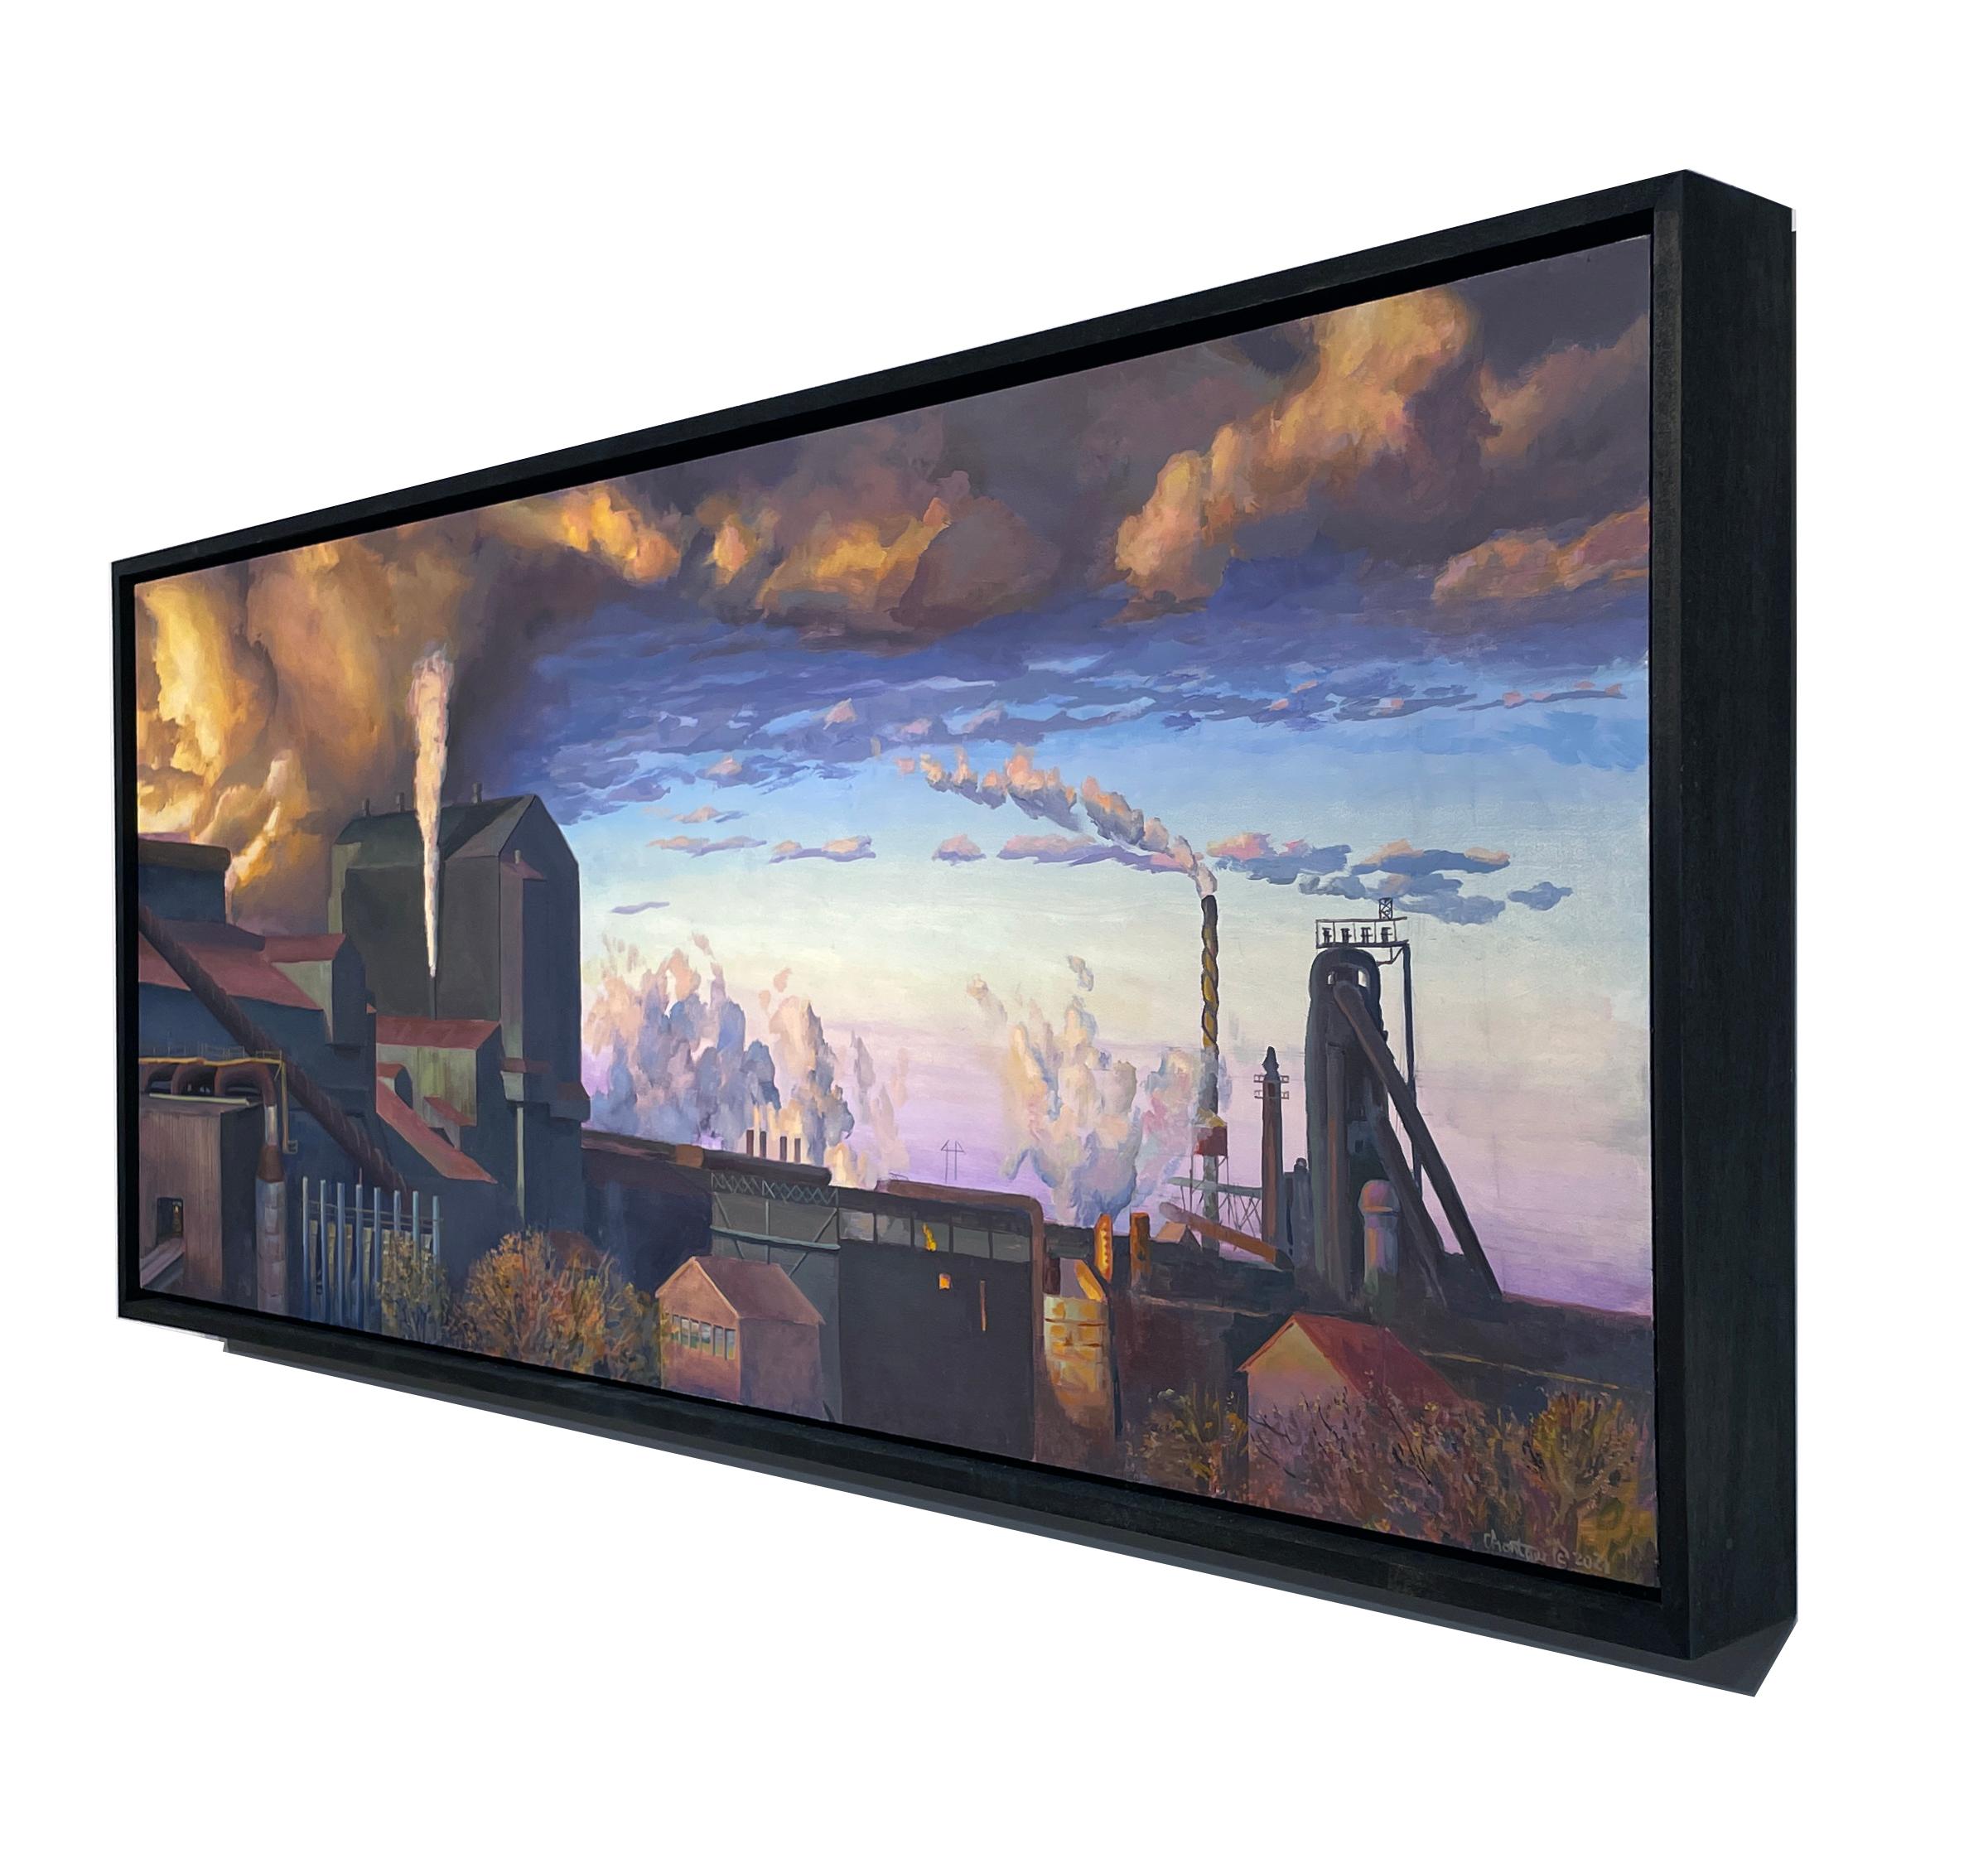  Steel Mills of Gary - Urban Industrial Landscape, Factories with Dramatic Sky - Painting by Art Chartow